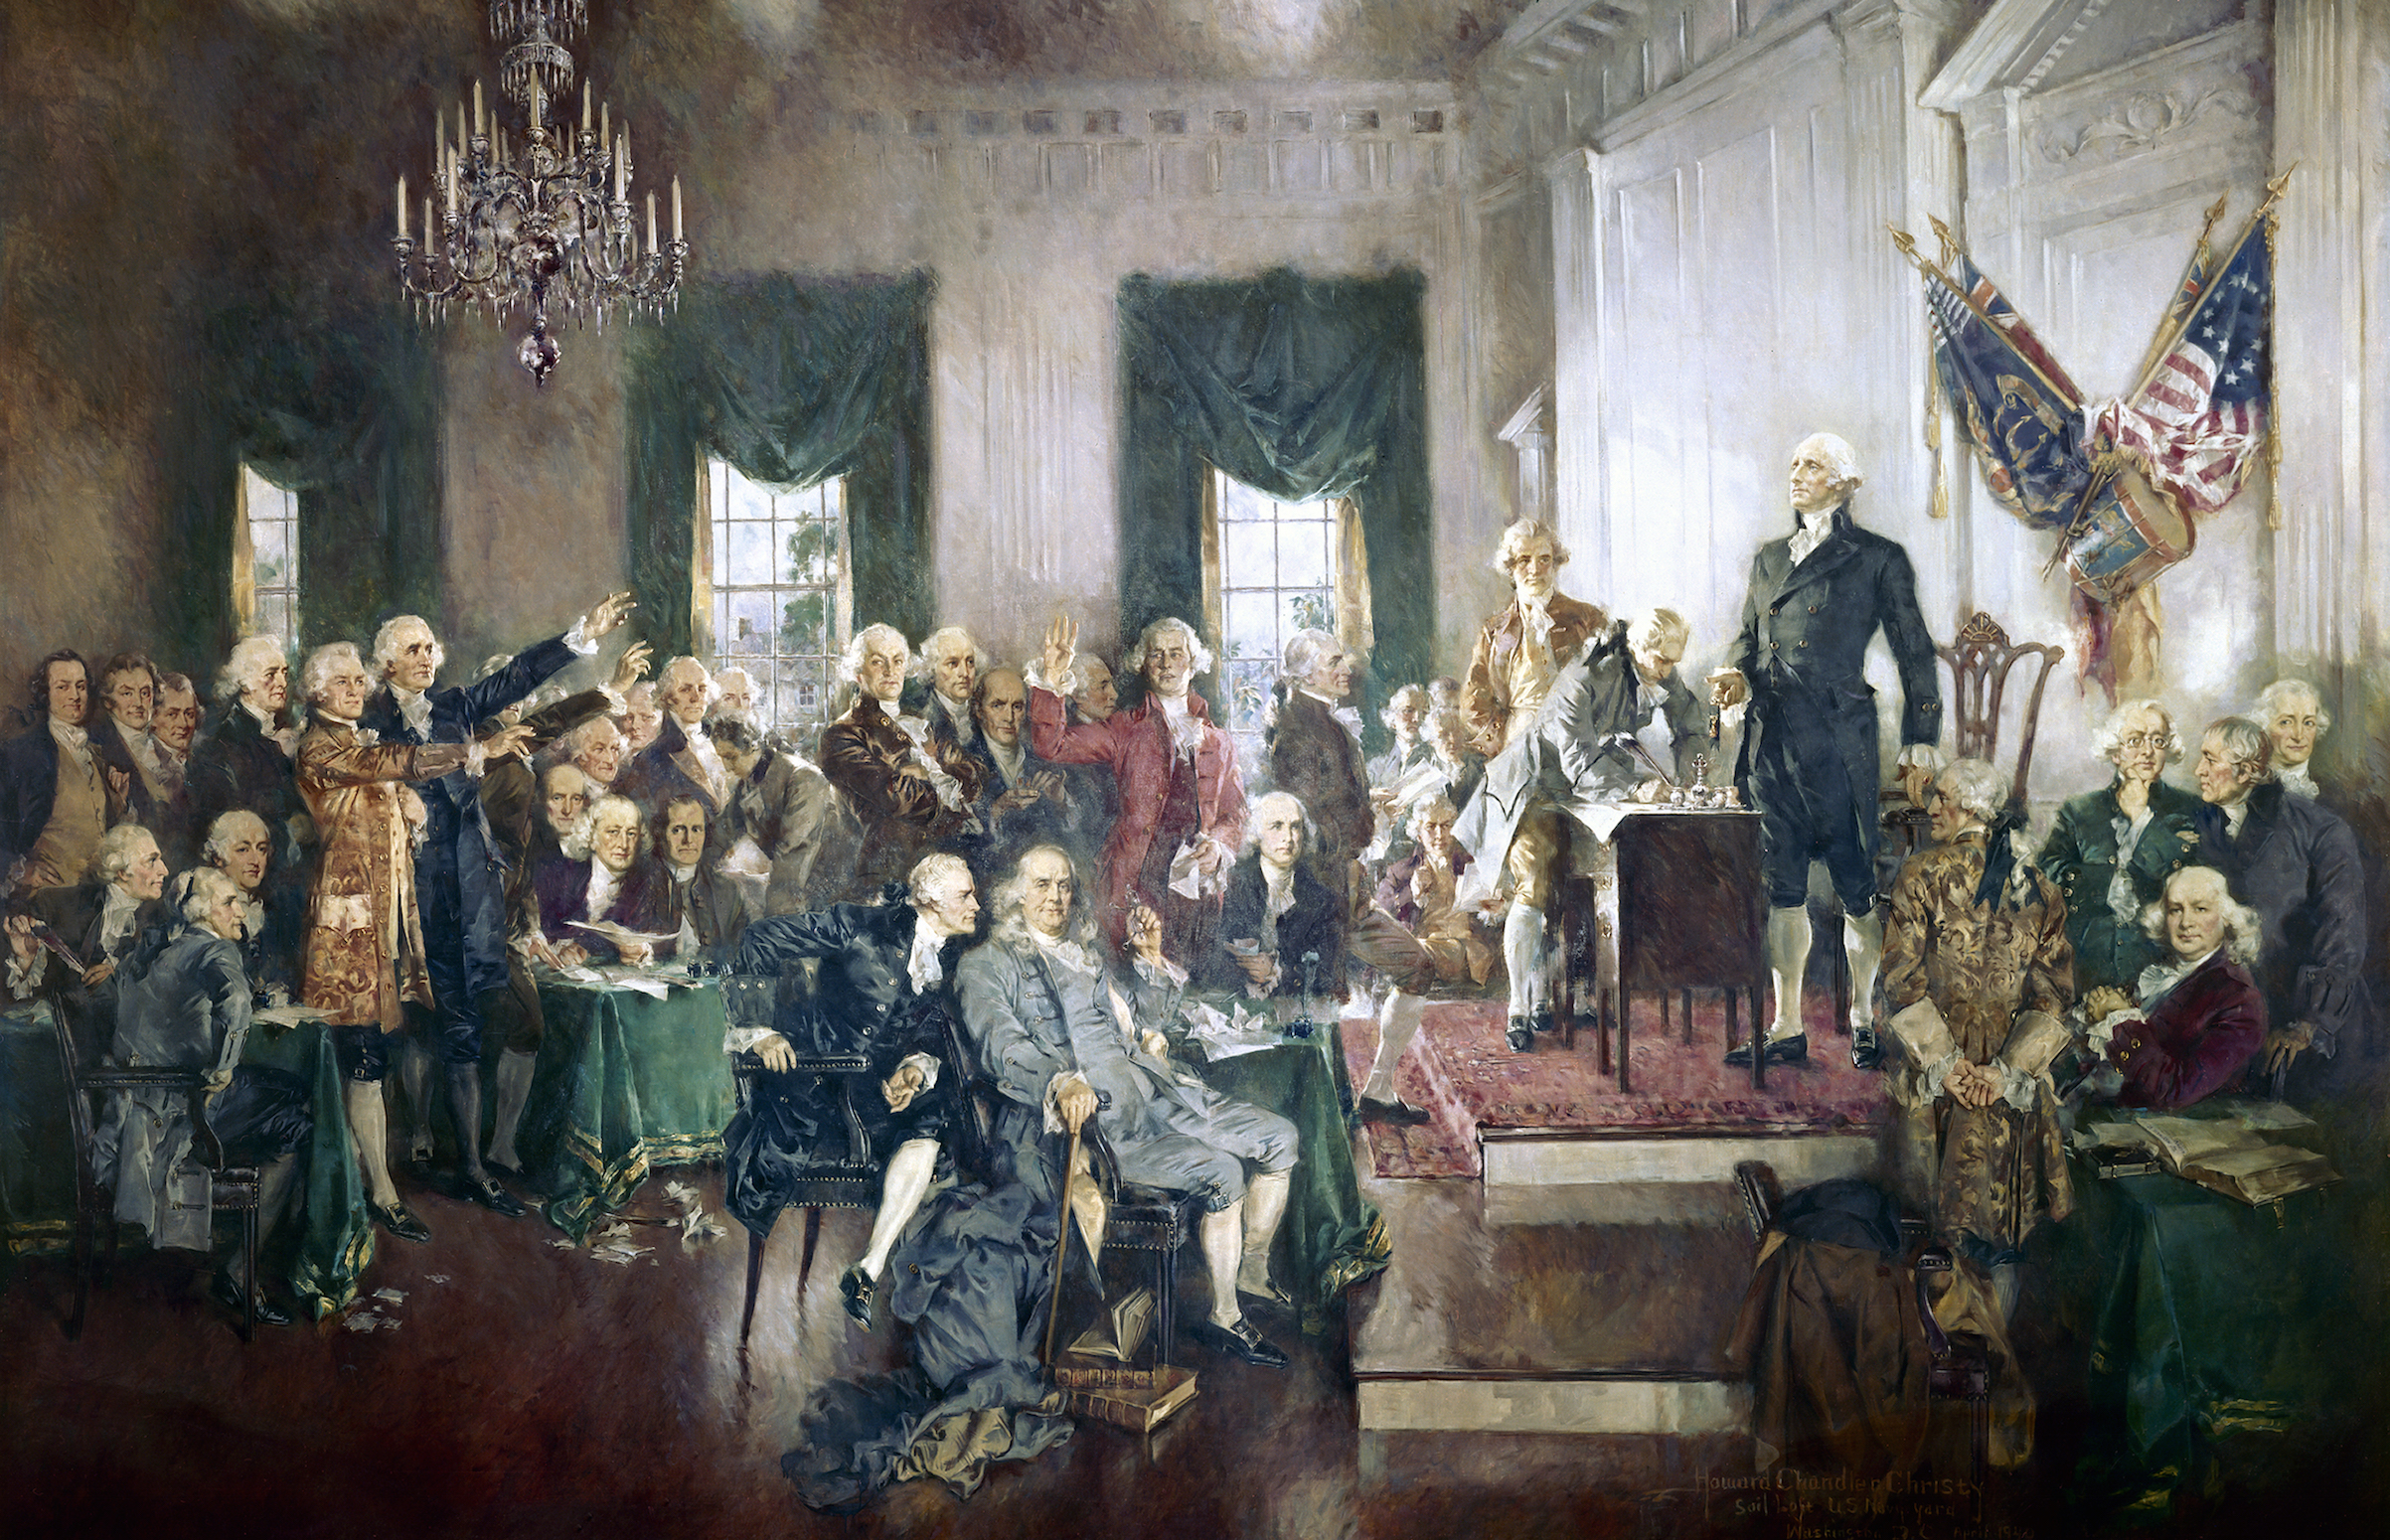 The Signing of the Constitution of the United States, with George Washington, Benjamin Franklin, and others at the Constitutional Convention of 1787; oil painting on canvas by Howard Chandler Christy, 1940. (GraphicaArtist/Getty Images)